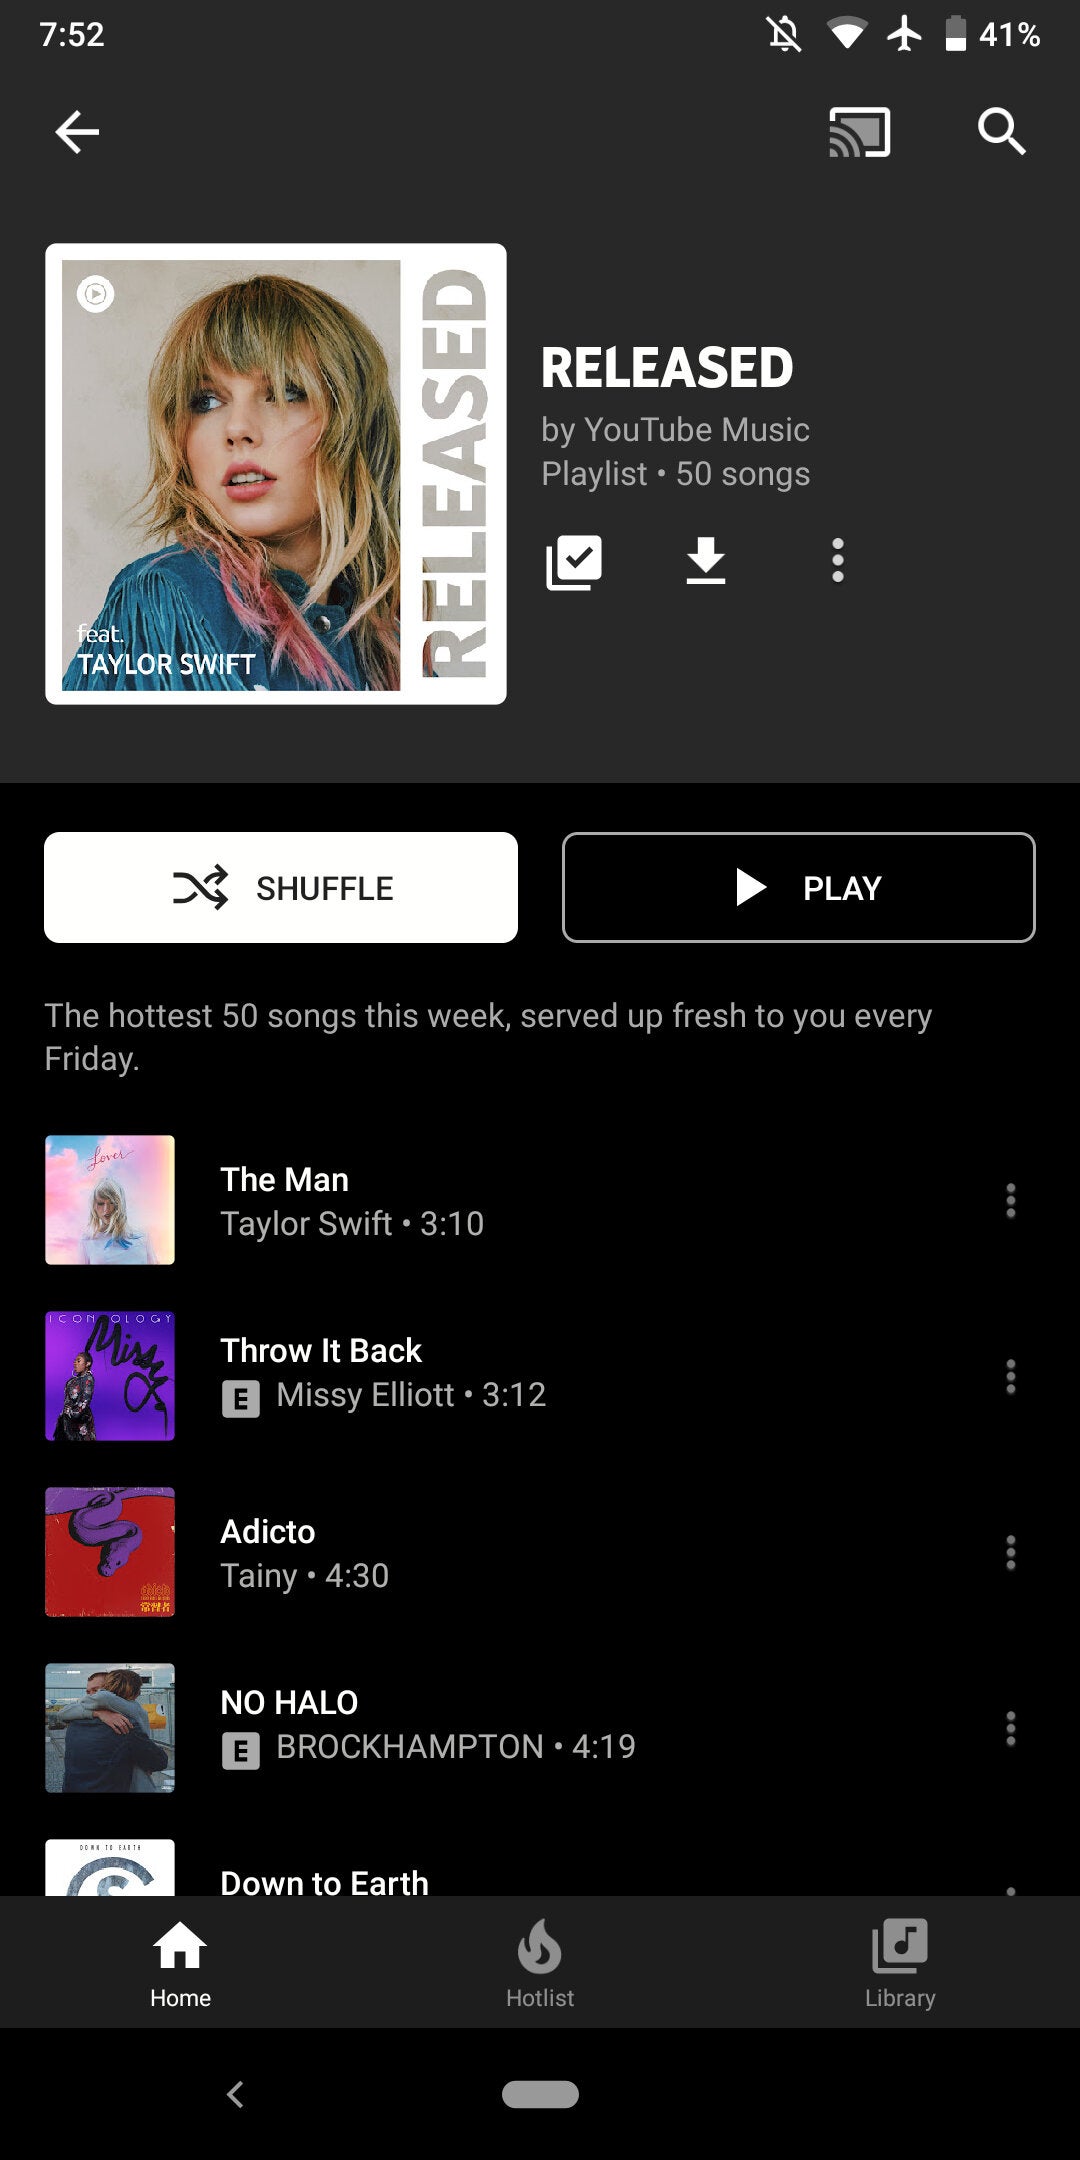 YouTube Music adds new feature to better compete with Apple Music and Spotify